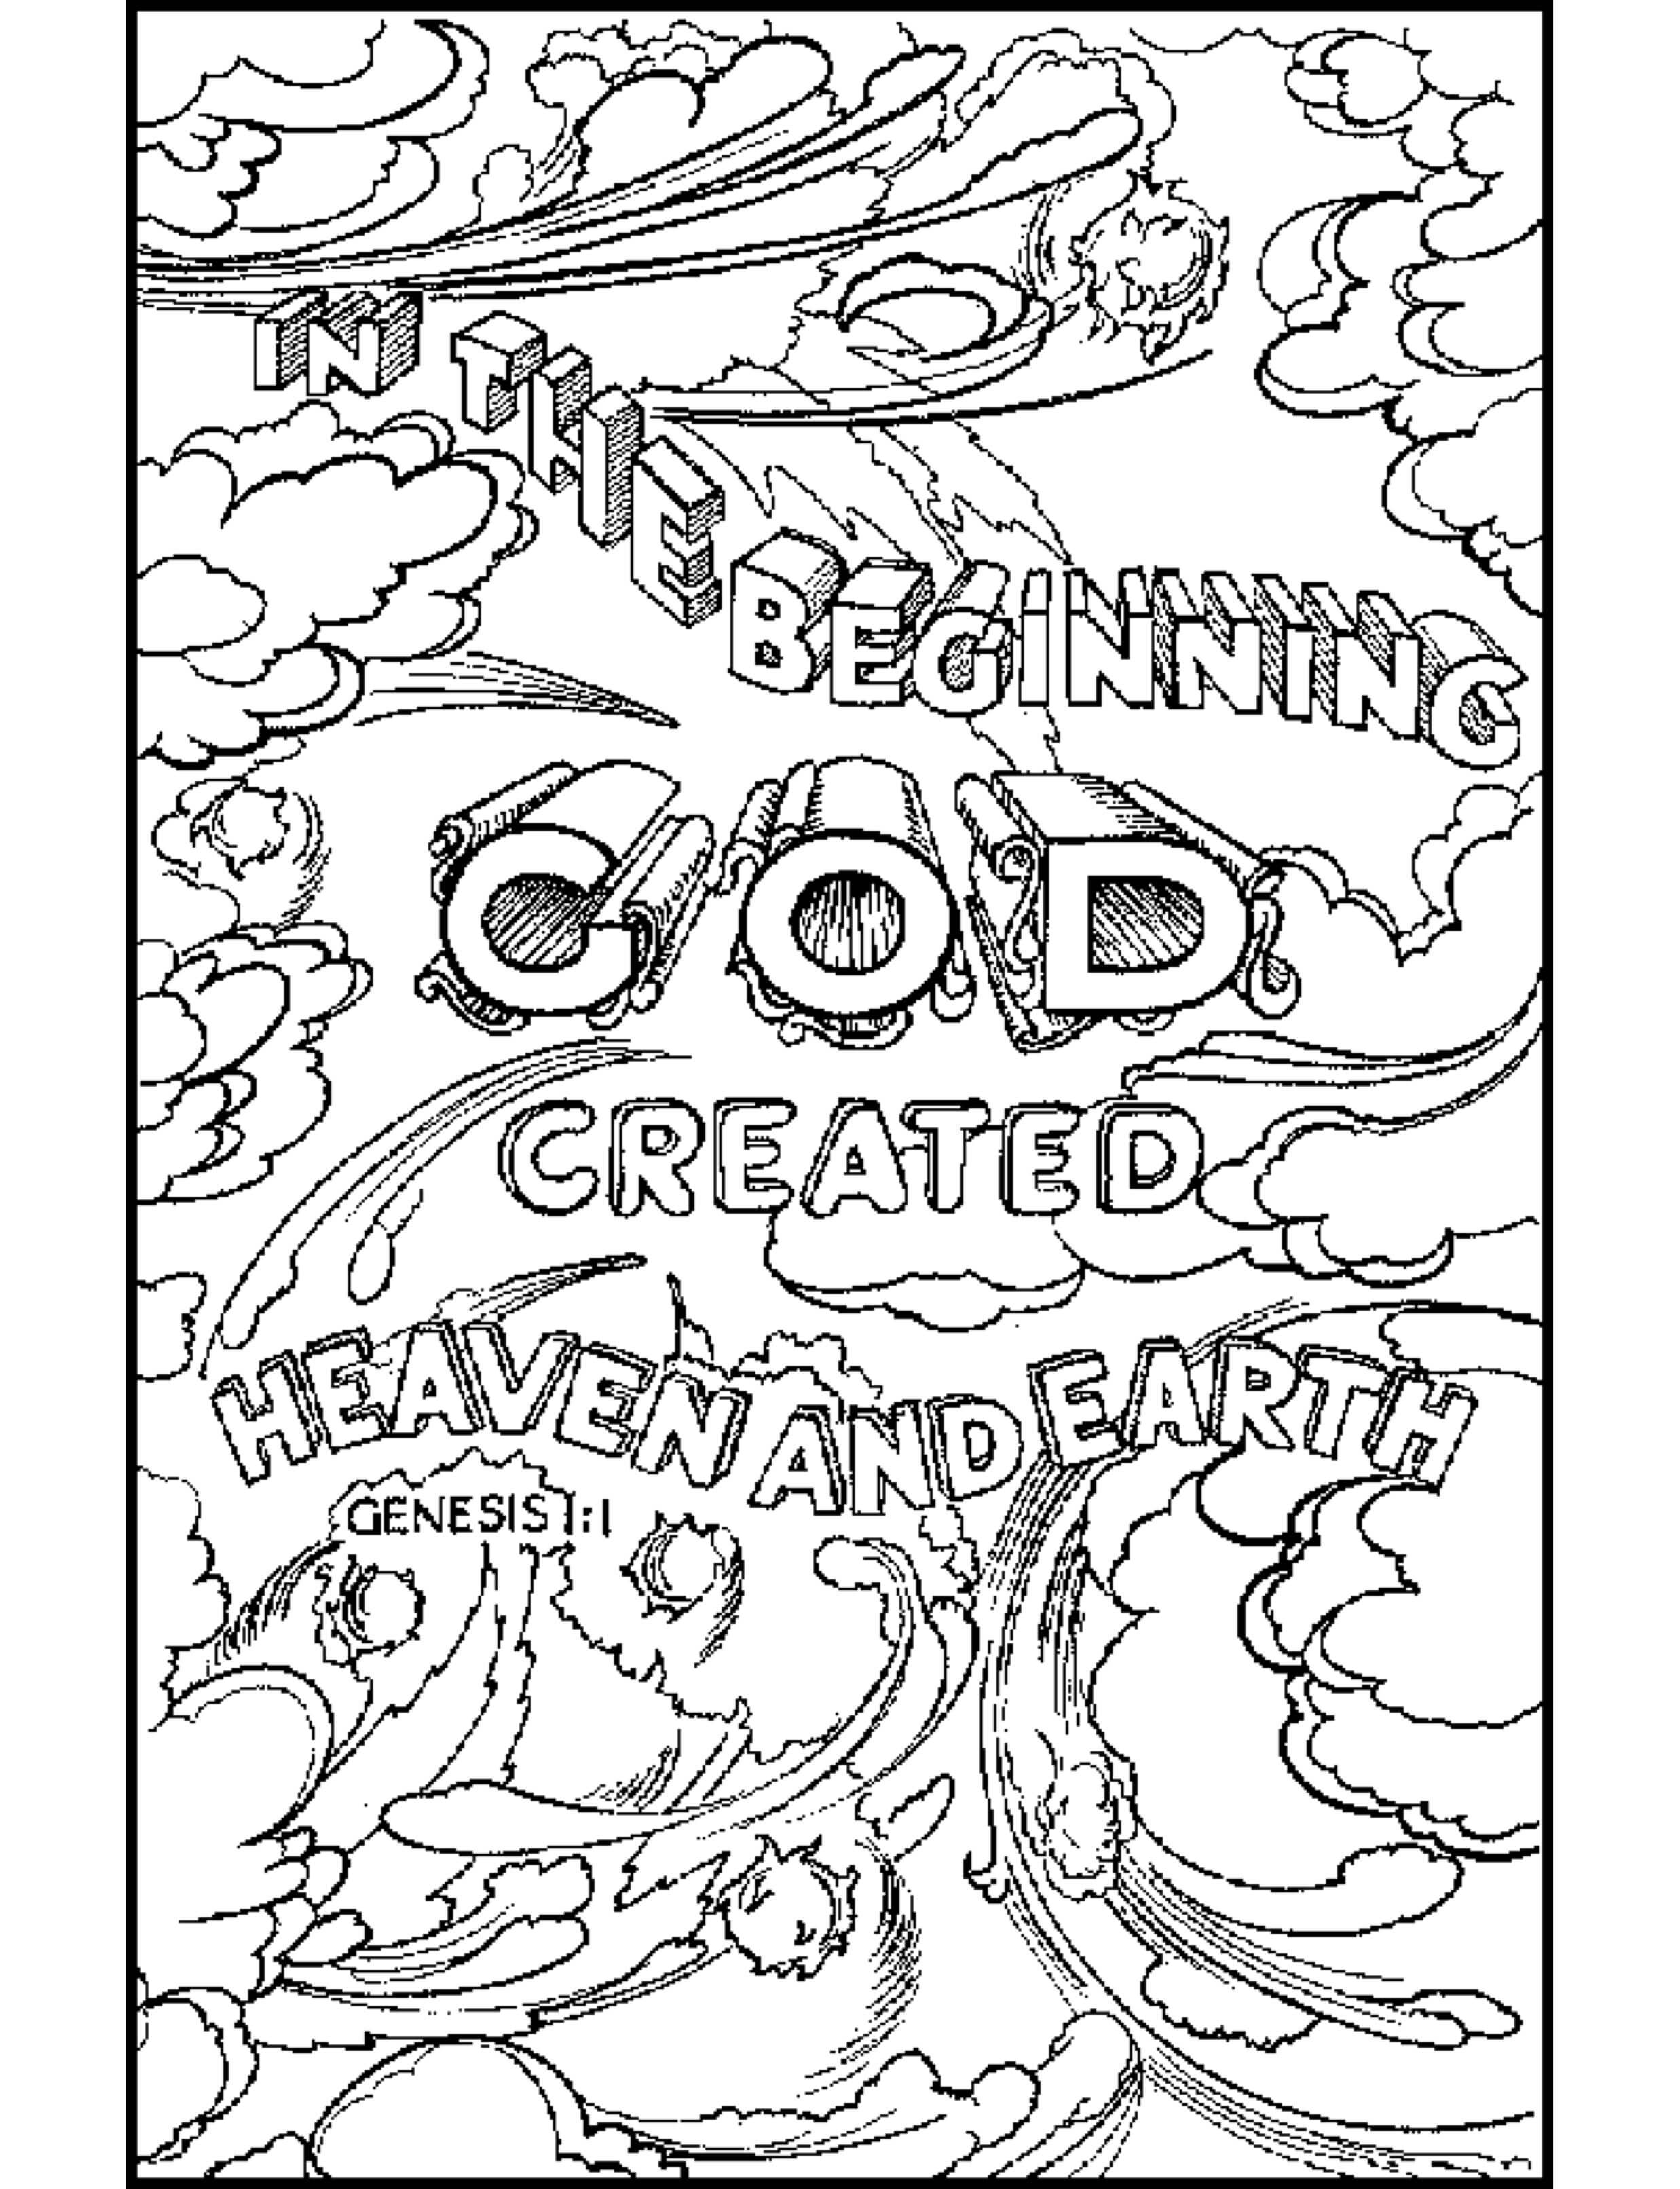 12 tribes of Israel coloring page Children's Bible